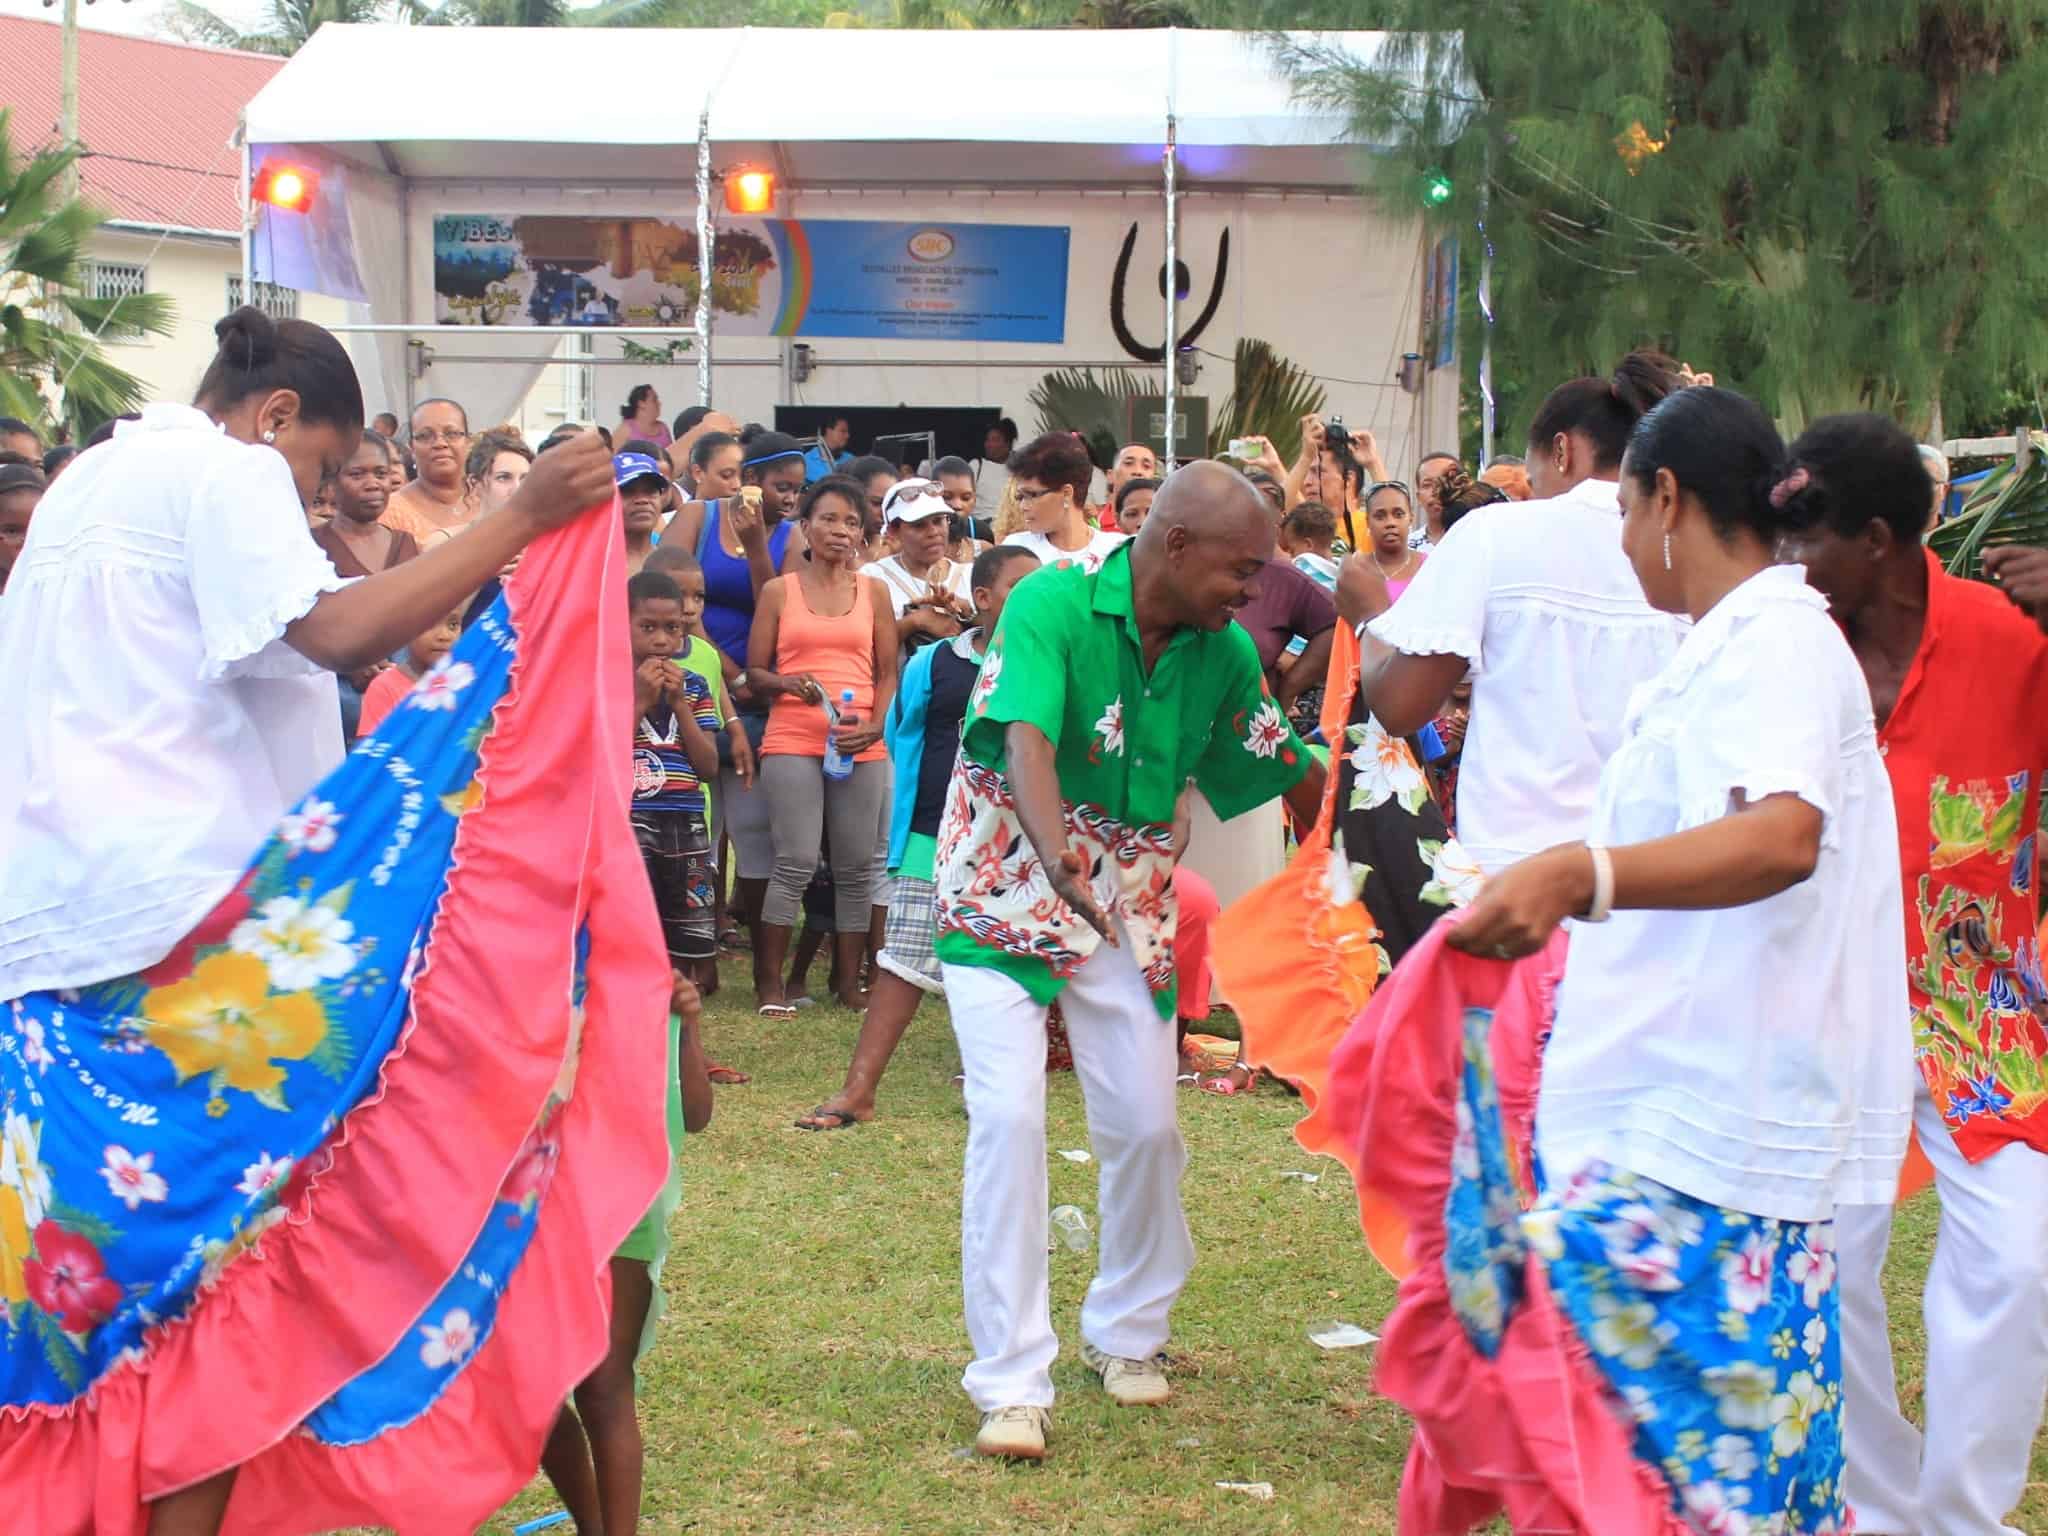 traditional dancing in seychelles